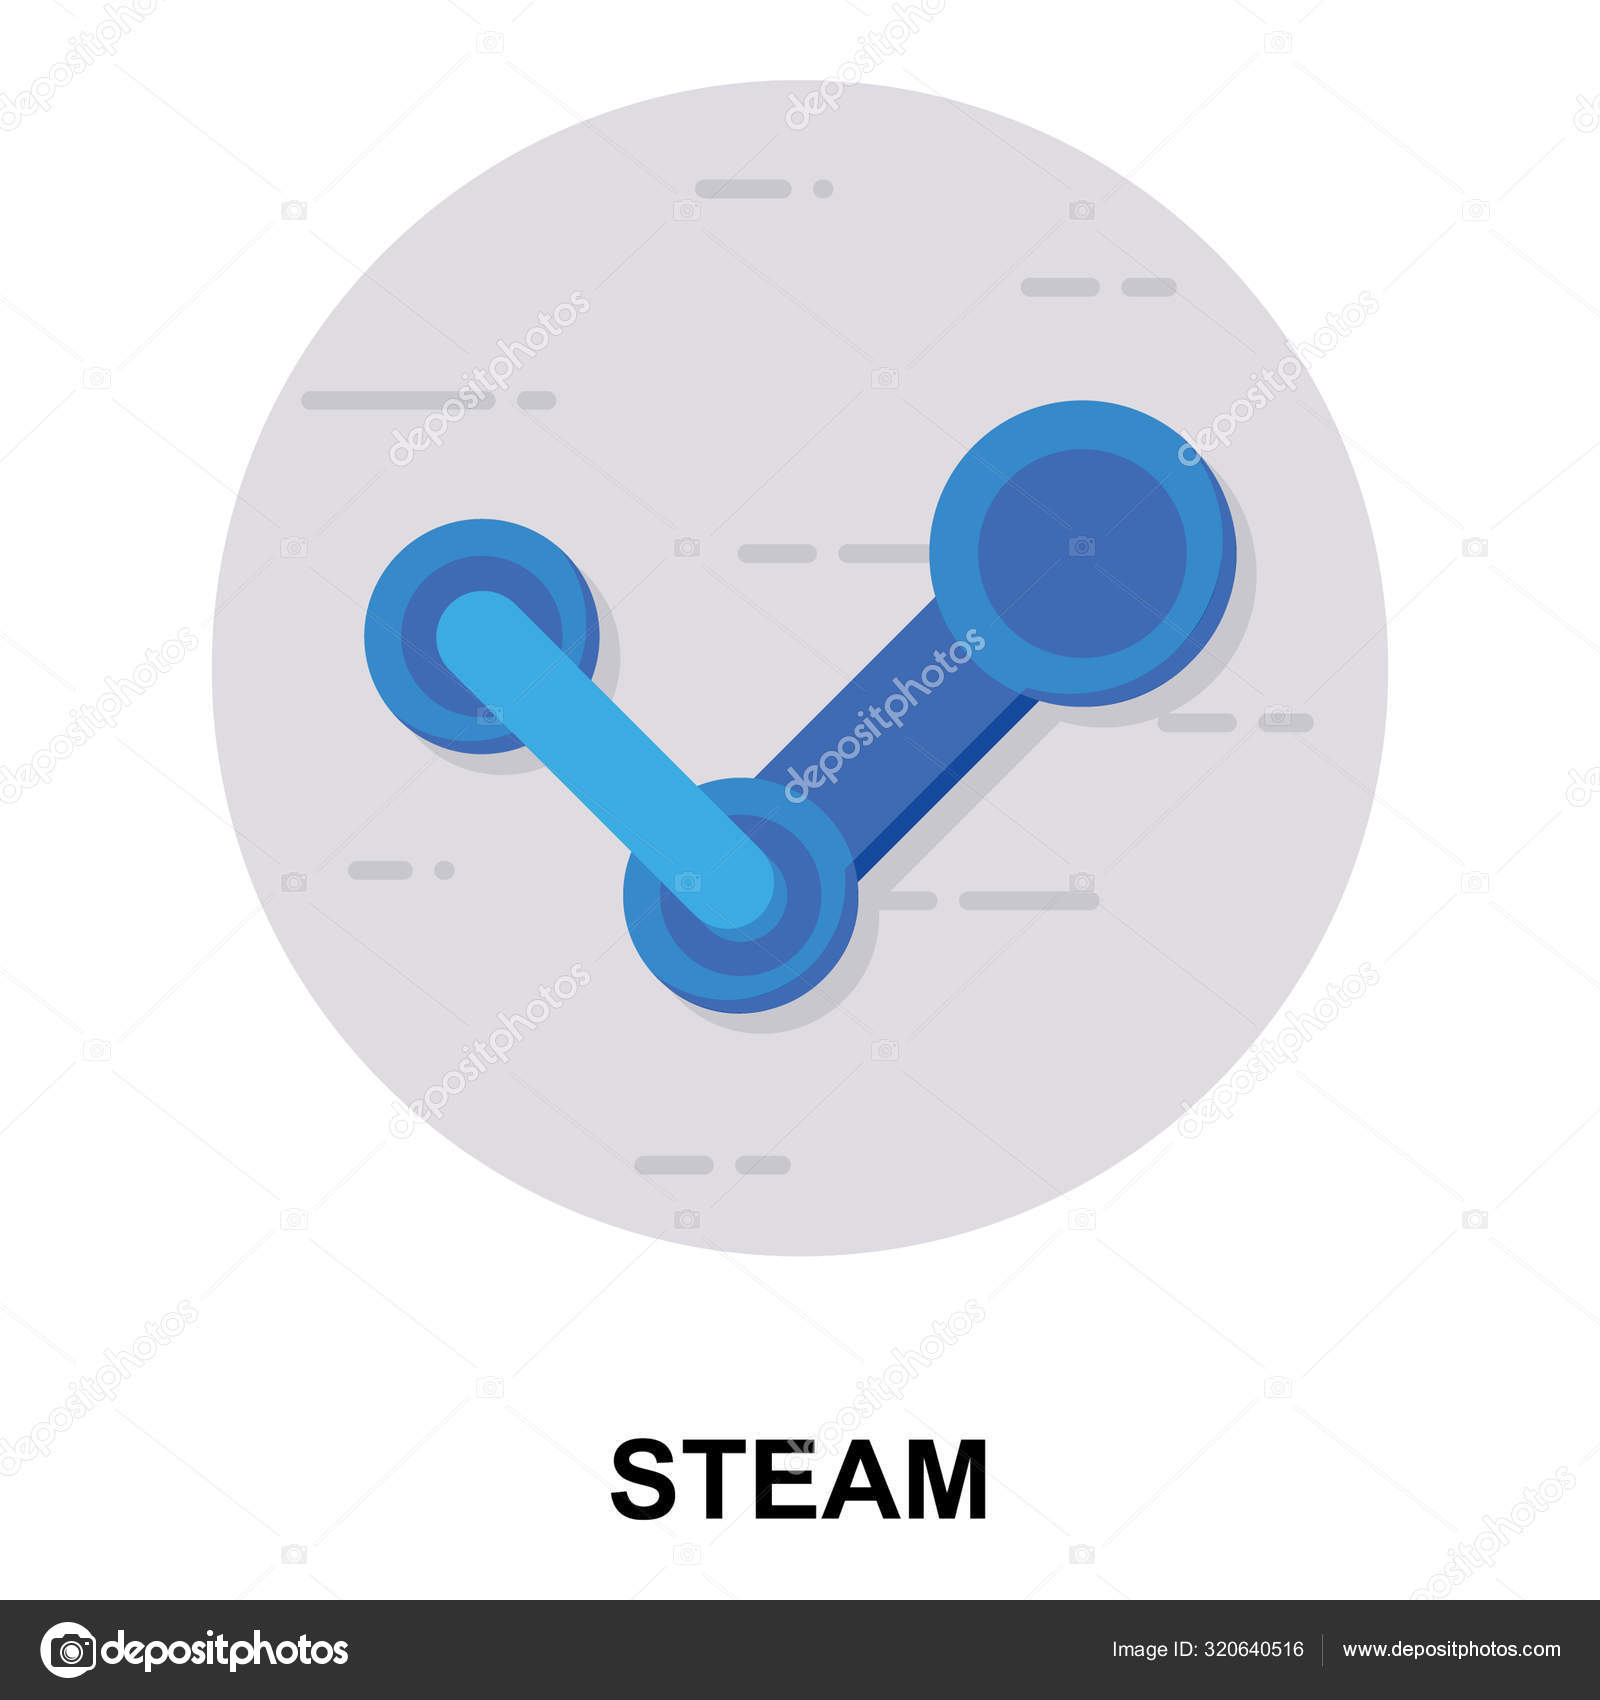 Steam icons gone фото 81